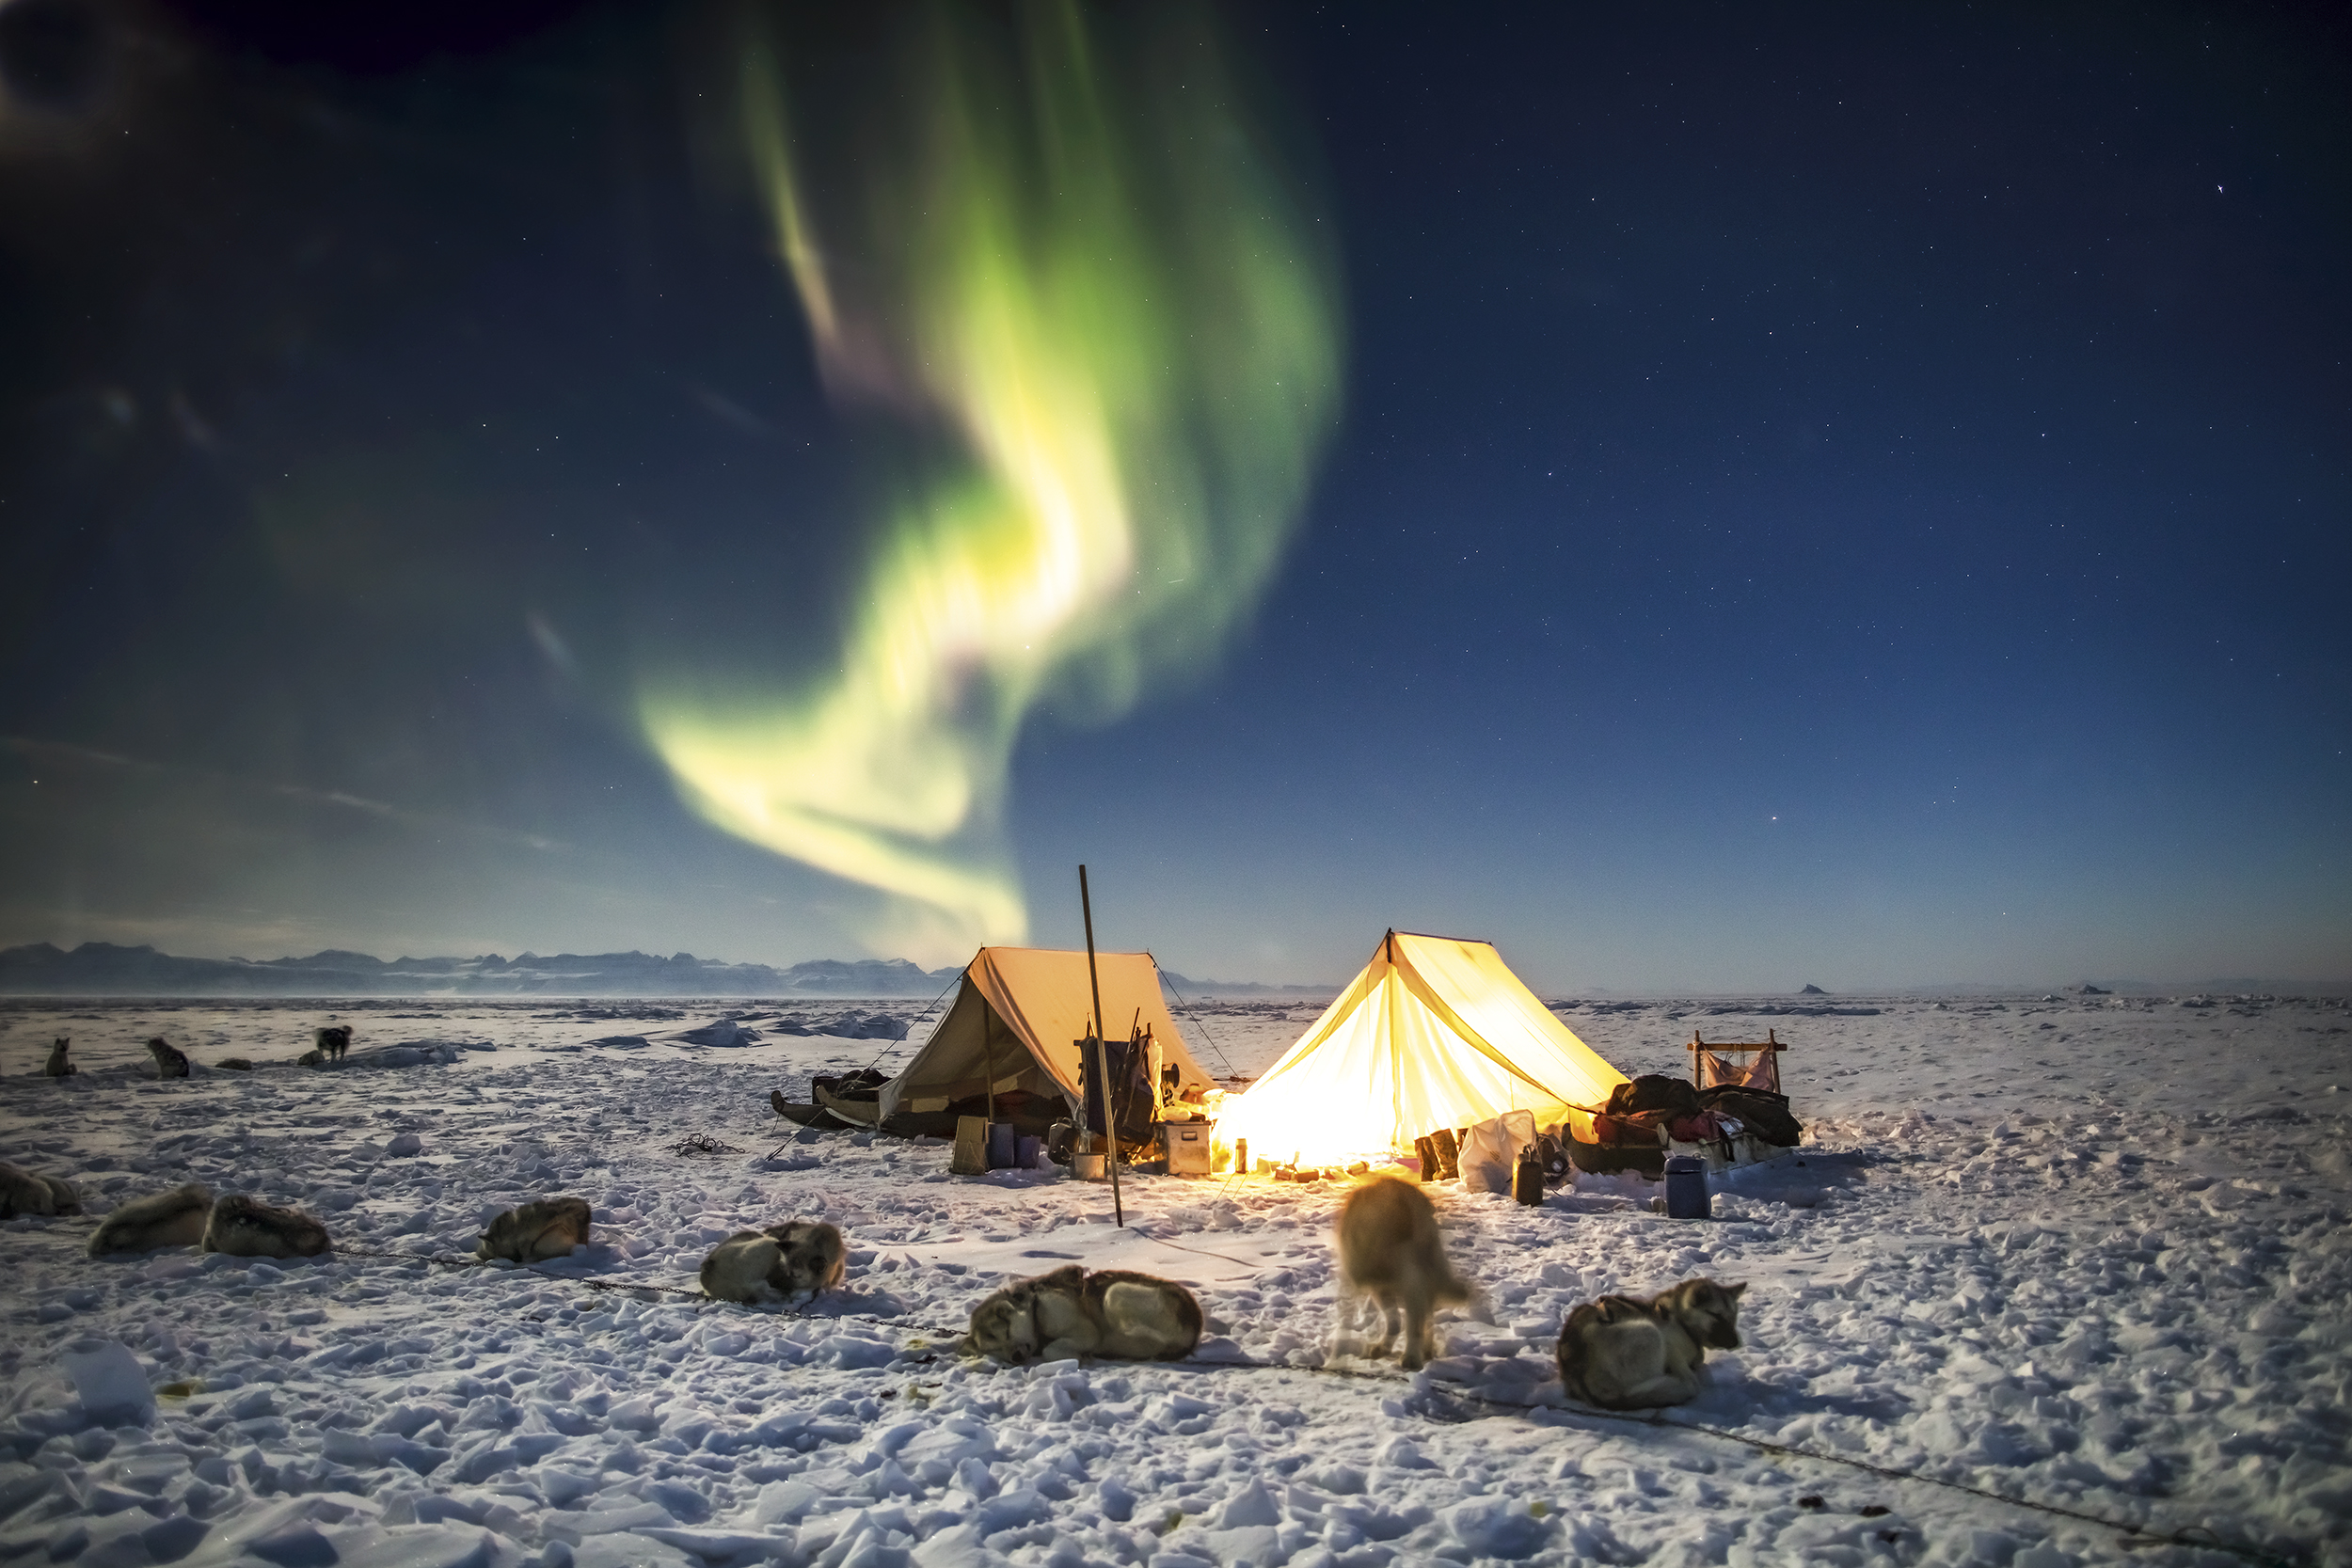 Northern lights over the camp on the ice in Ittoqqortoormiit. Photo by Carsten Egevang - Visit East Greenland